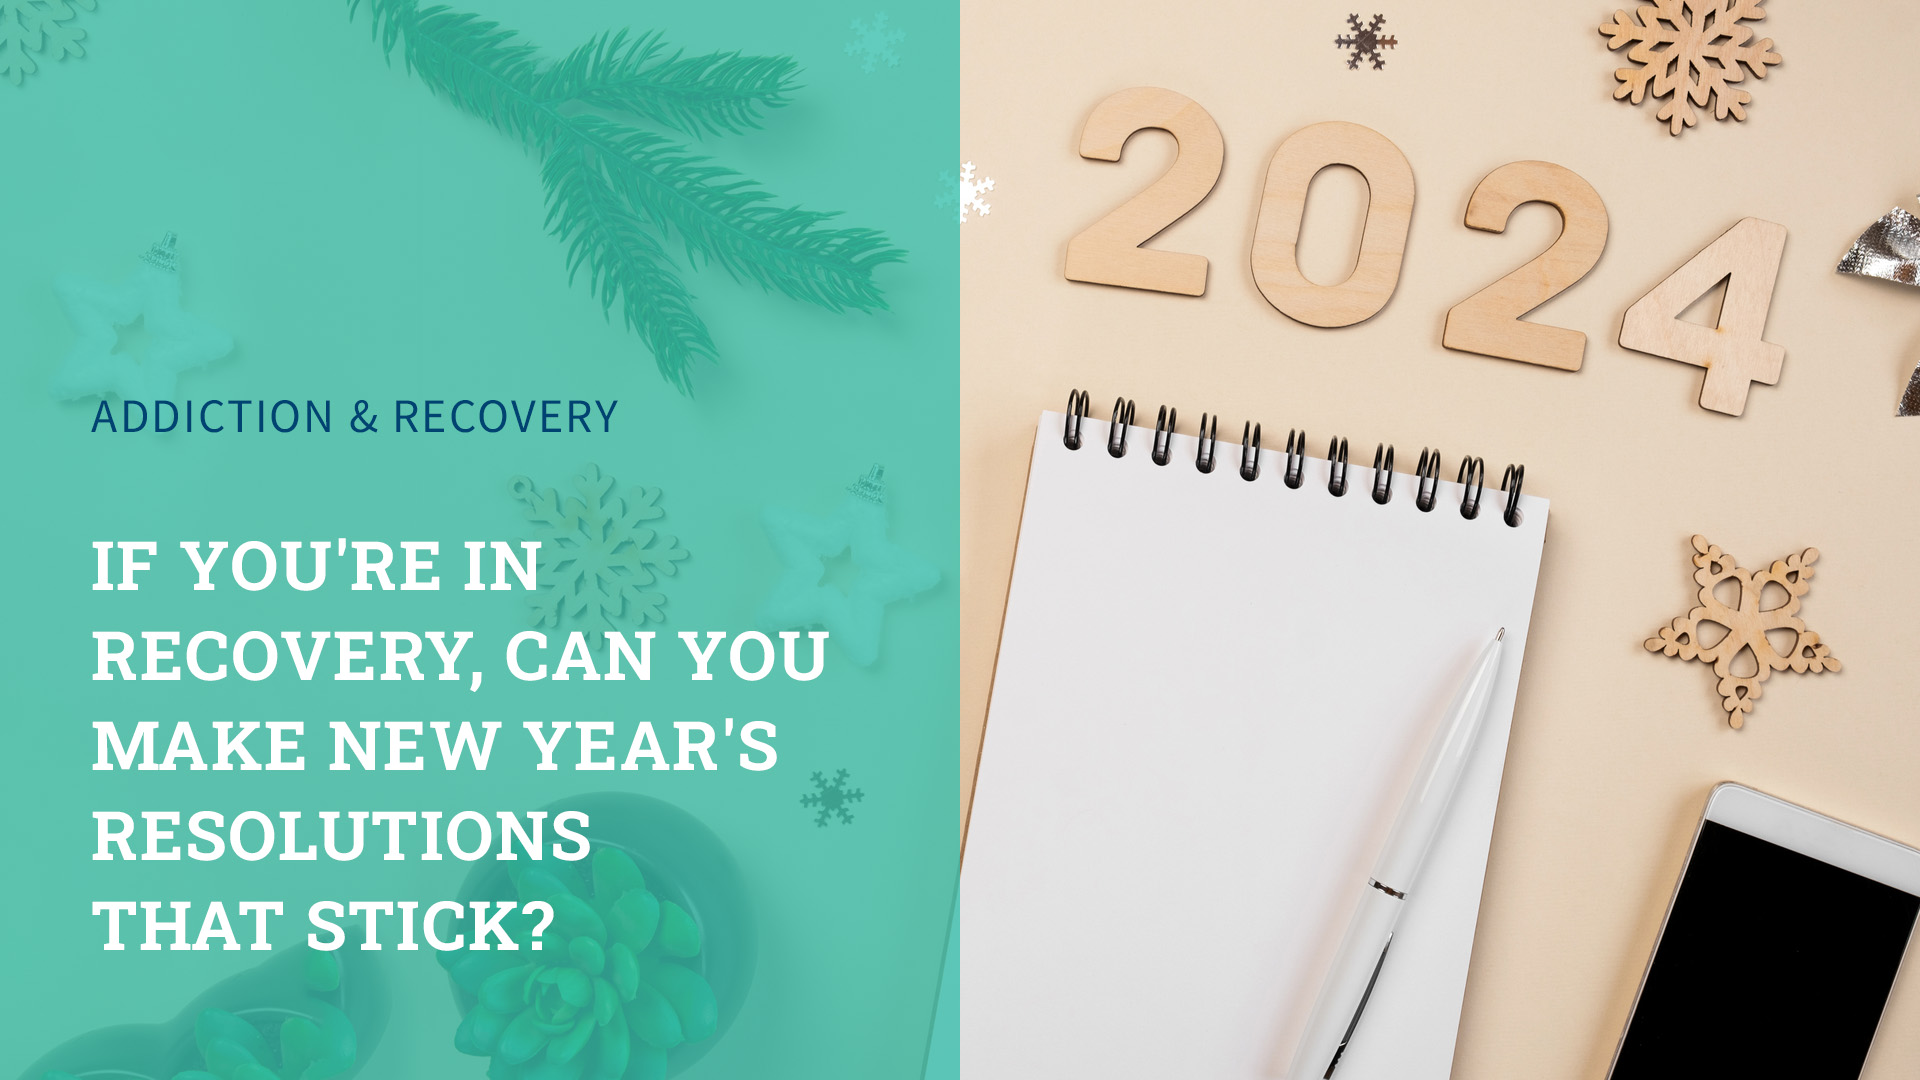 If You’re in Recovery, Can You Make New Year’s Resolutions That Stick?